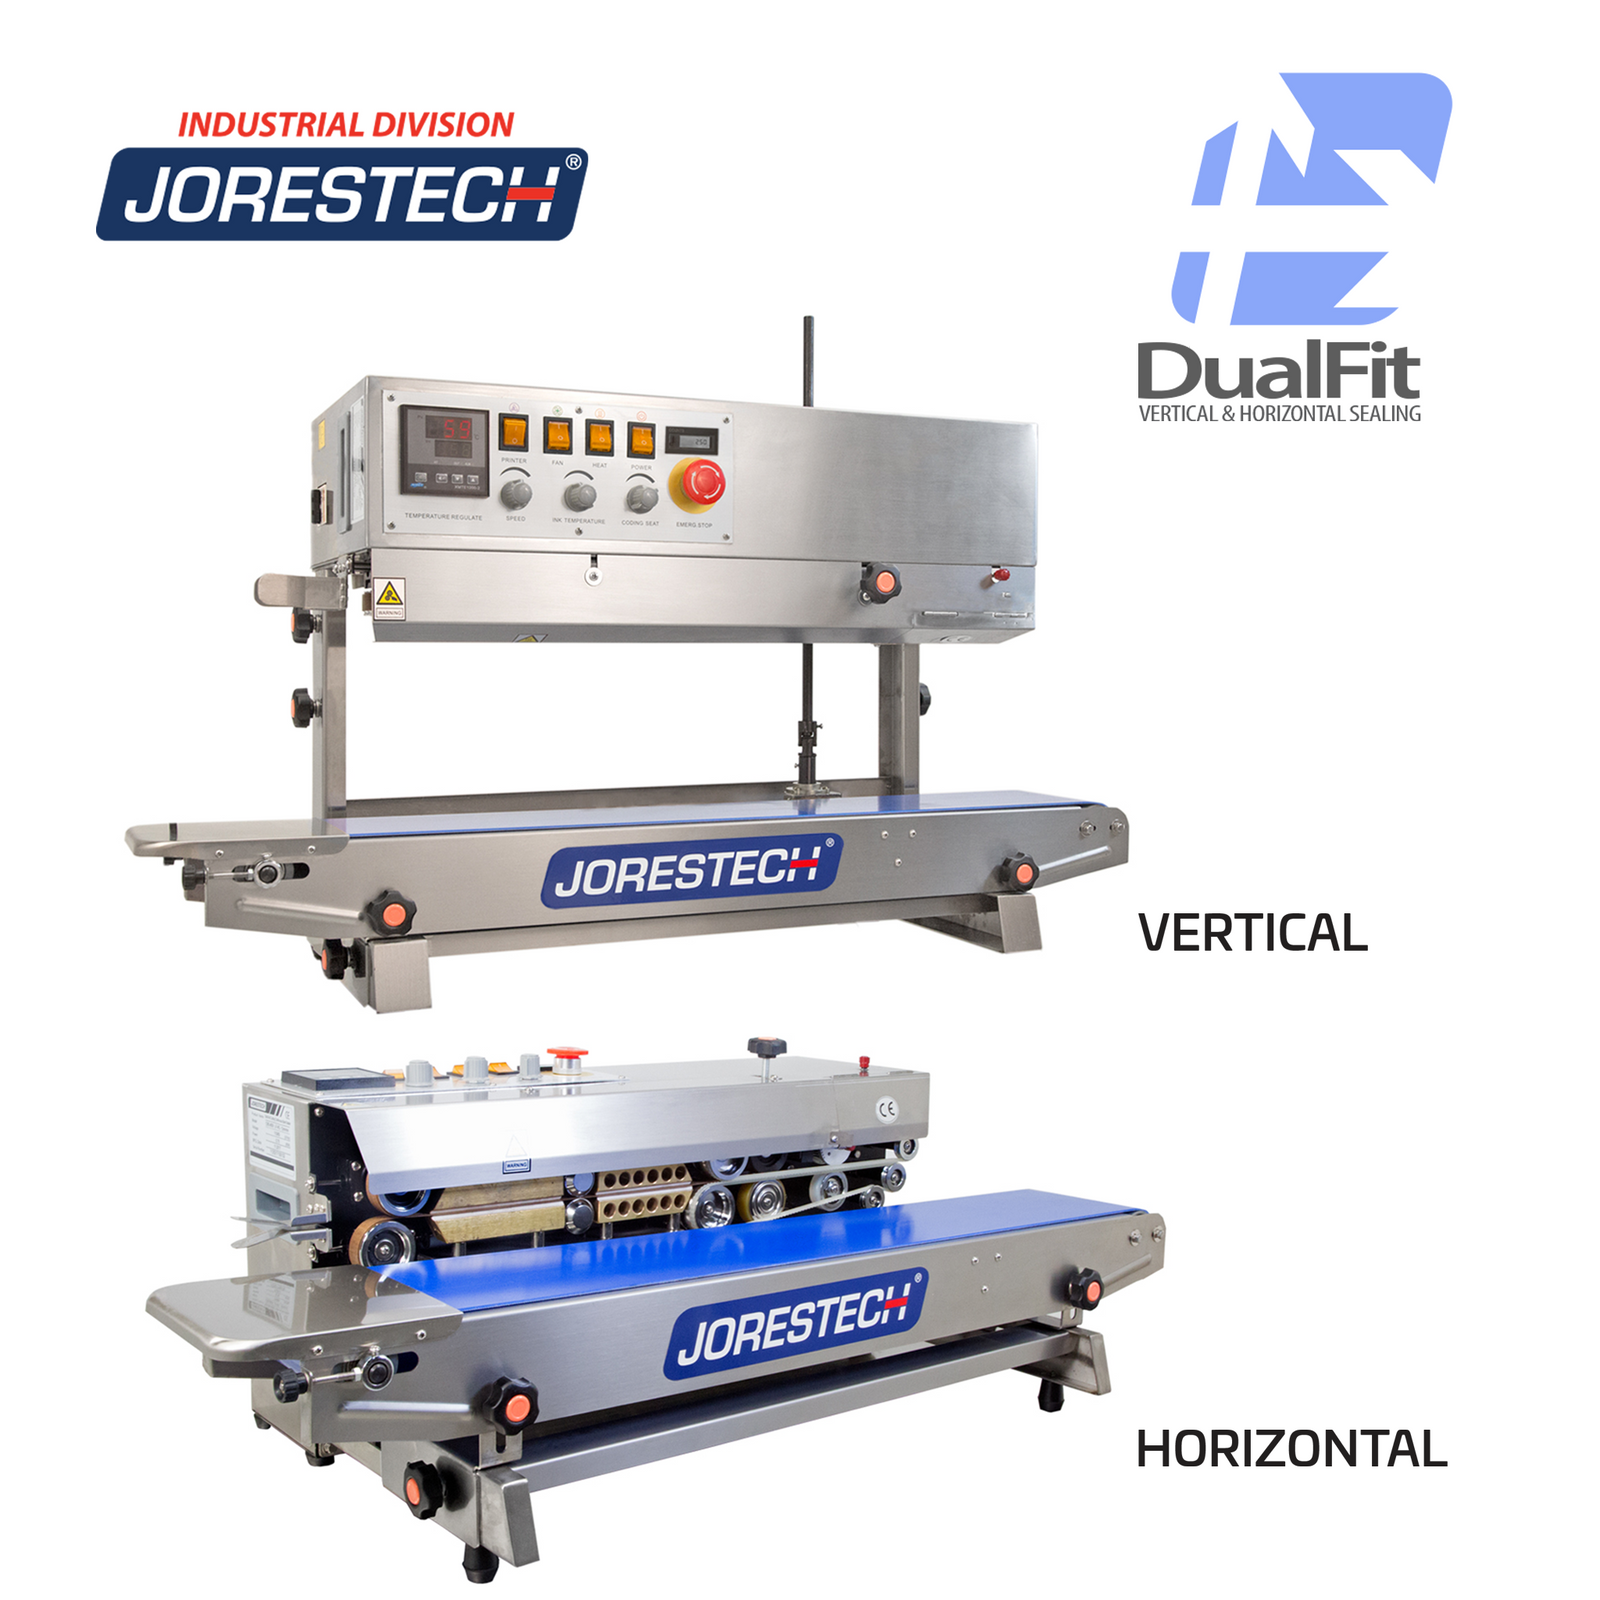 Showing the vertical and horizontal positioning of the stainless steel JORES TECHNOLOGIES® left to right continuous band sealer. Dual fit logo with arrows indicate that this table top bag sealer can be used for vertical and for horizontal applications. 